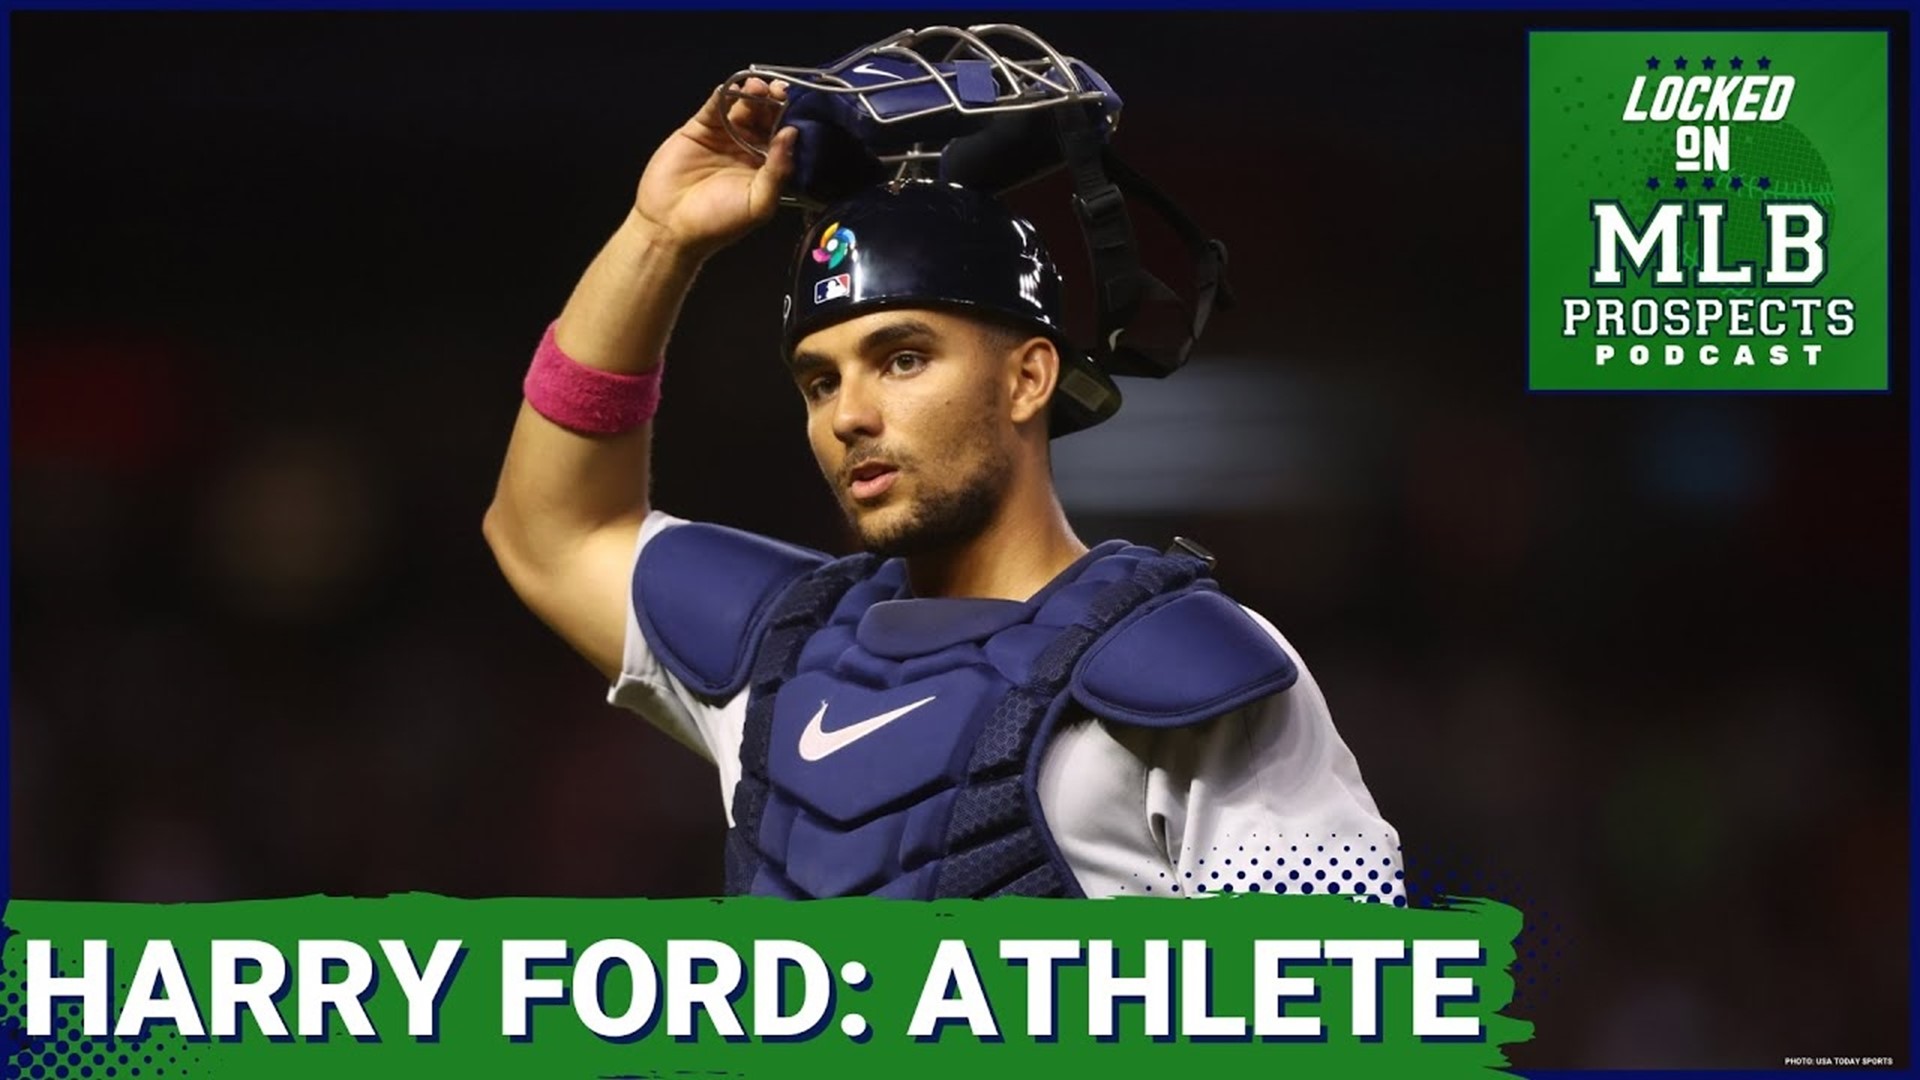 In this episode, Lindsay spotlights the cream of the crop in the Mariners' prospect lineup, featuring the top talents like C Harry Ford and SS Cole Young